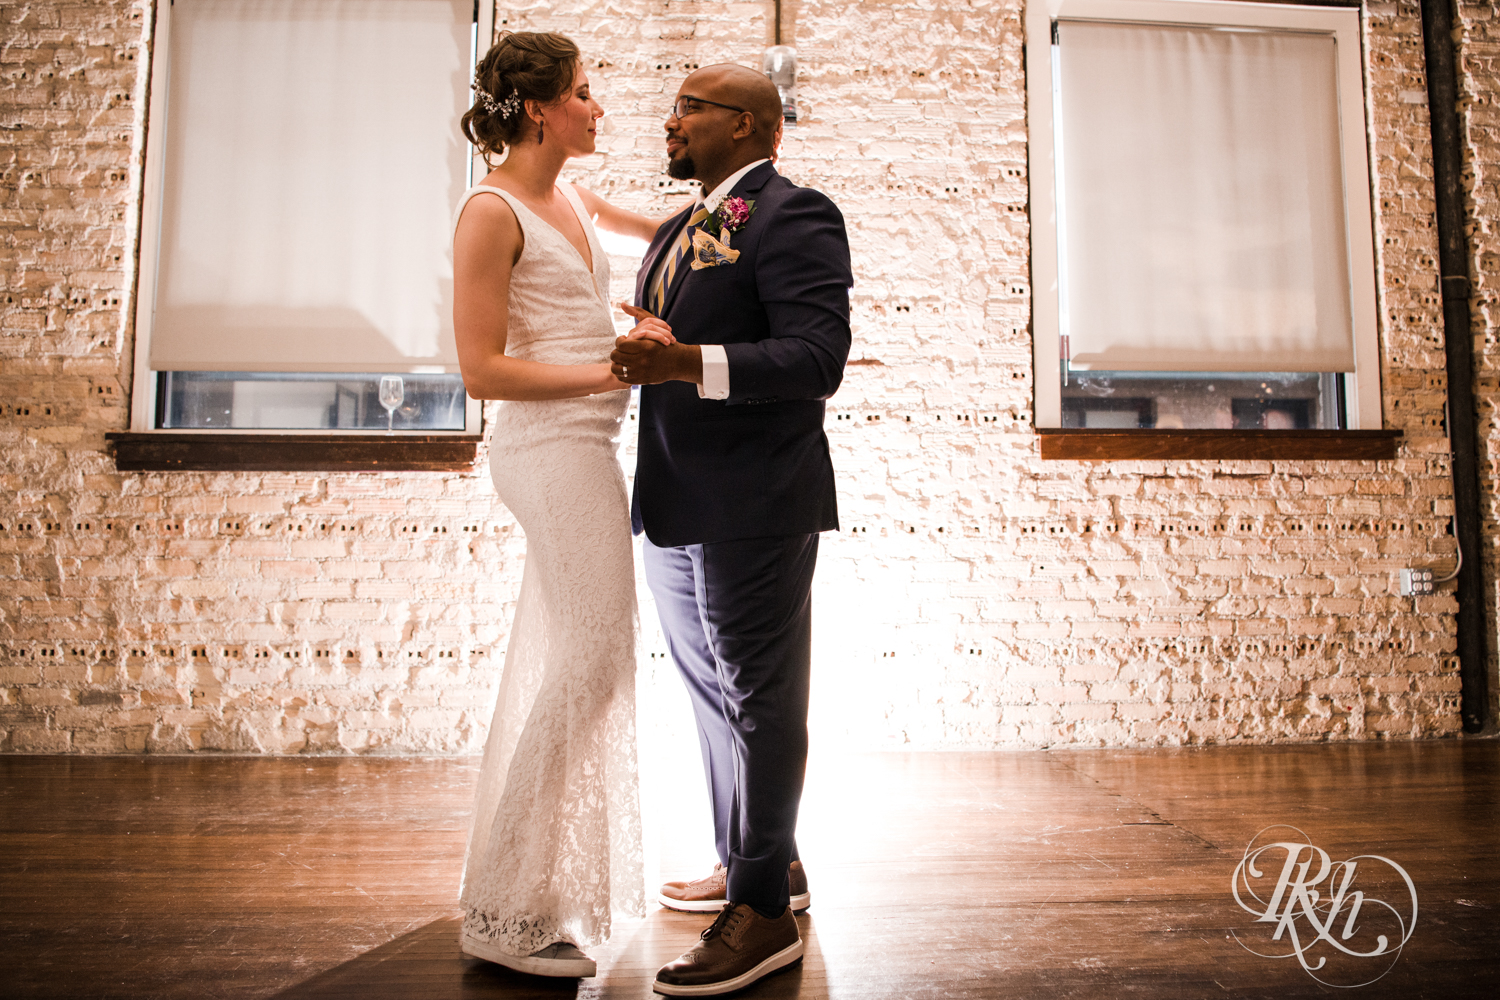 Biracial bride and groom dance during wedding at Five Event Center in Minneapolis, Minnesota.